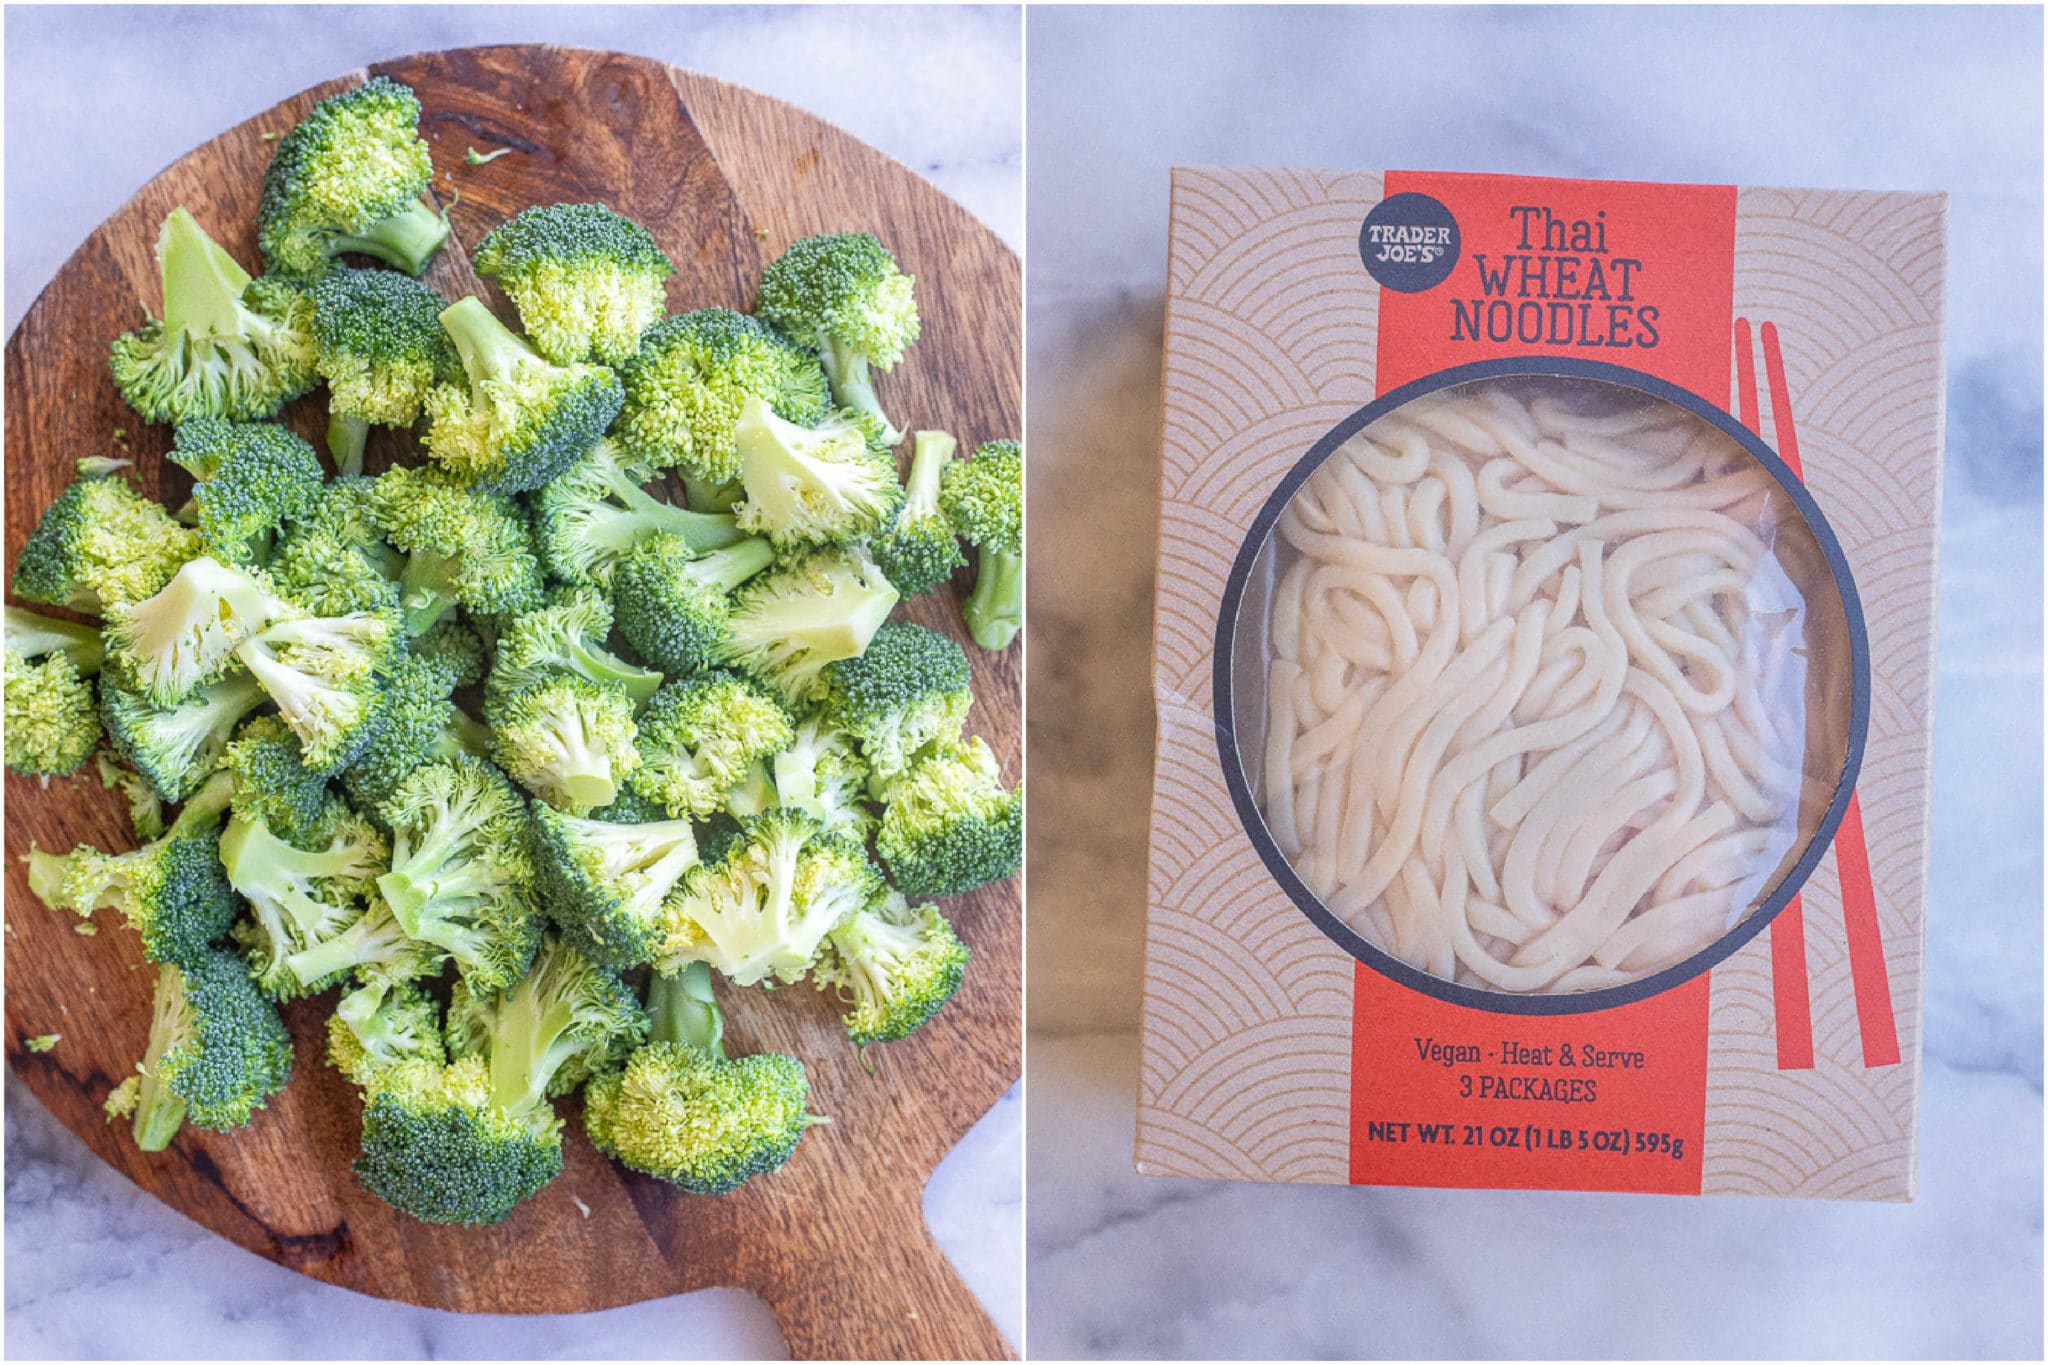 broccoli florets and Thai wheat noodles used for this recipe